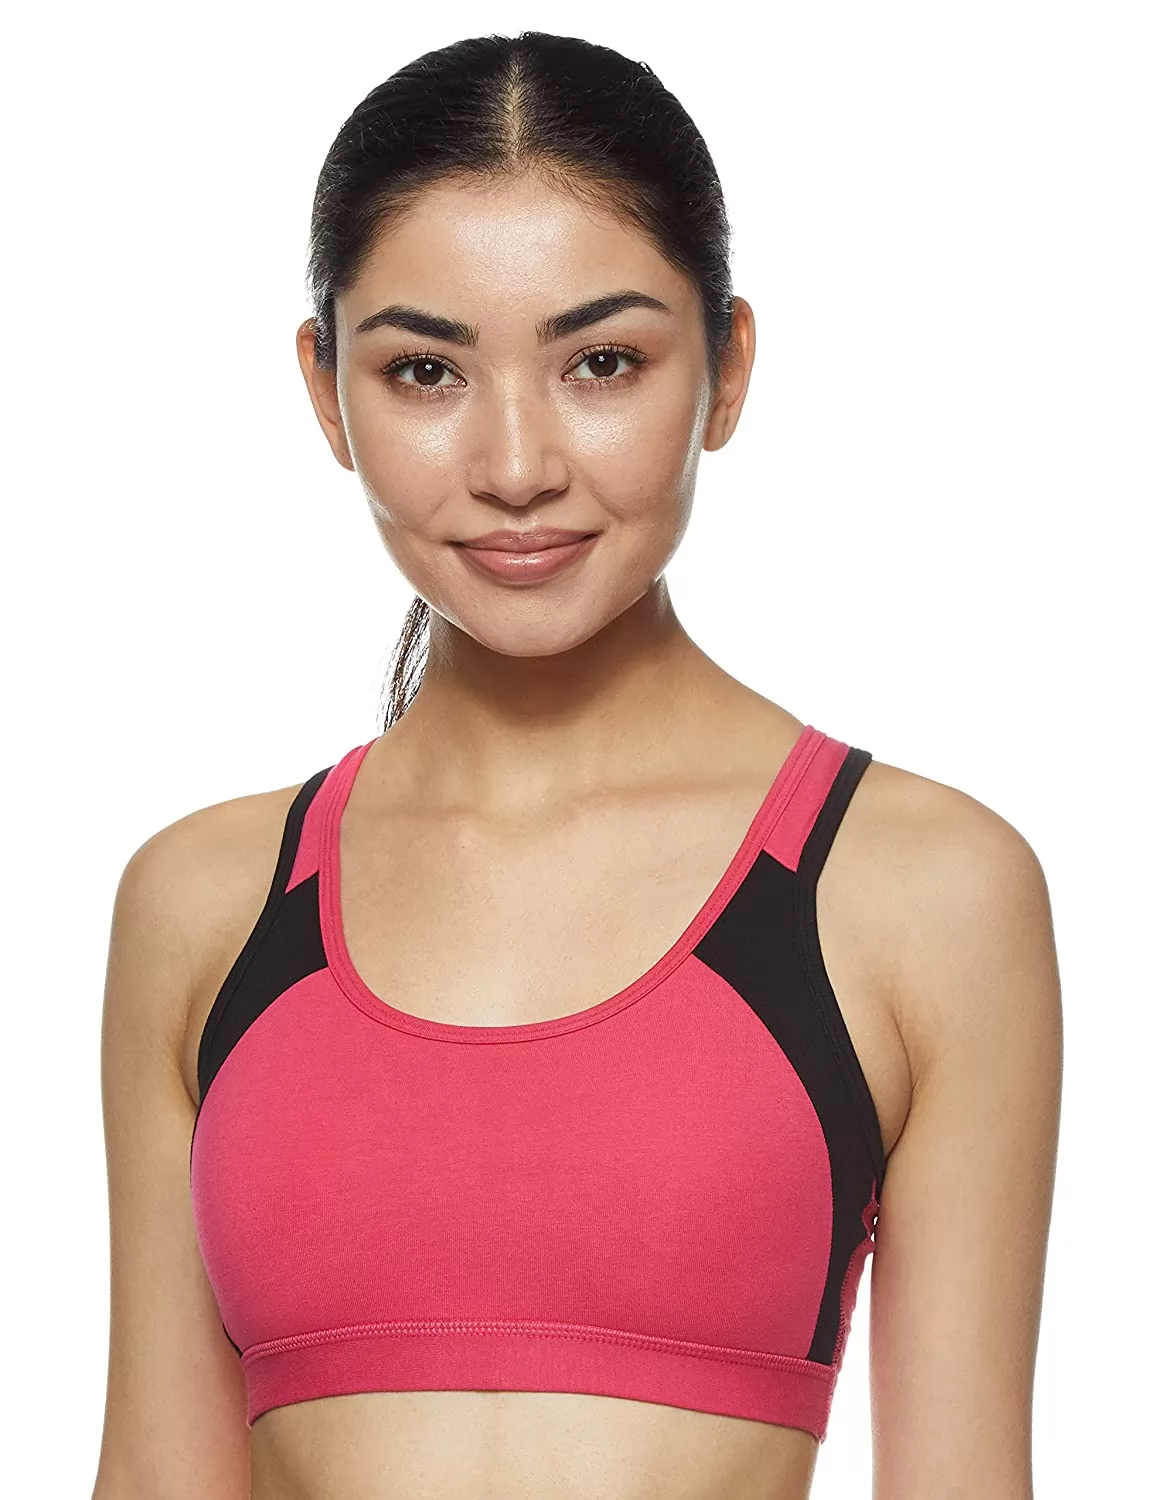 10 Best Sports Bra In India: For Girls And Womens